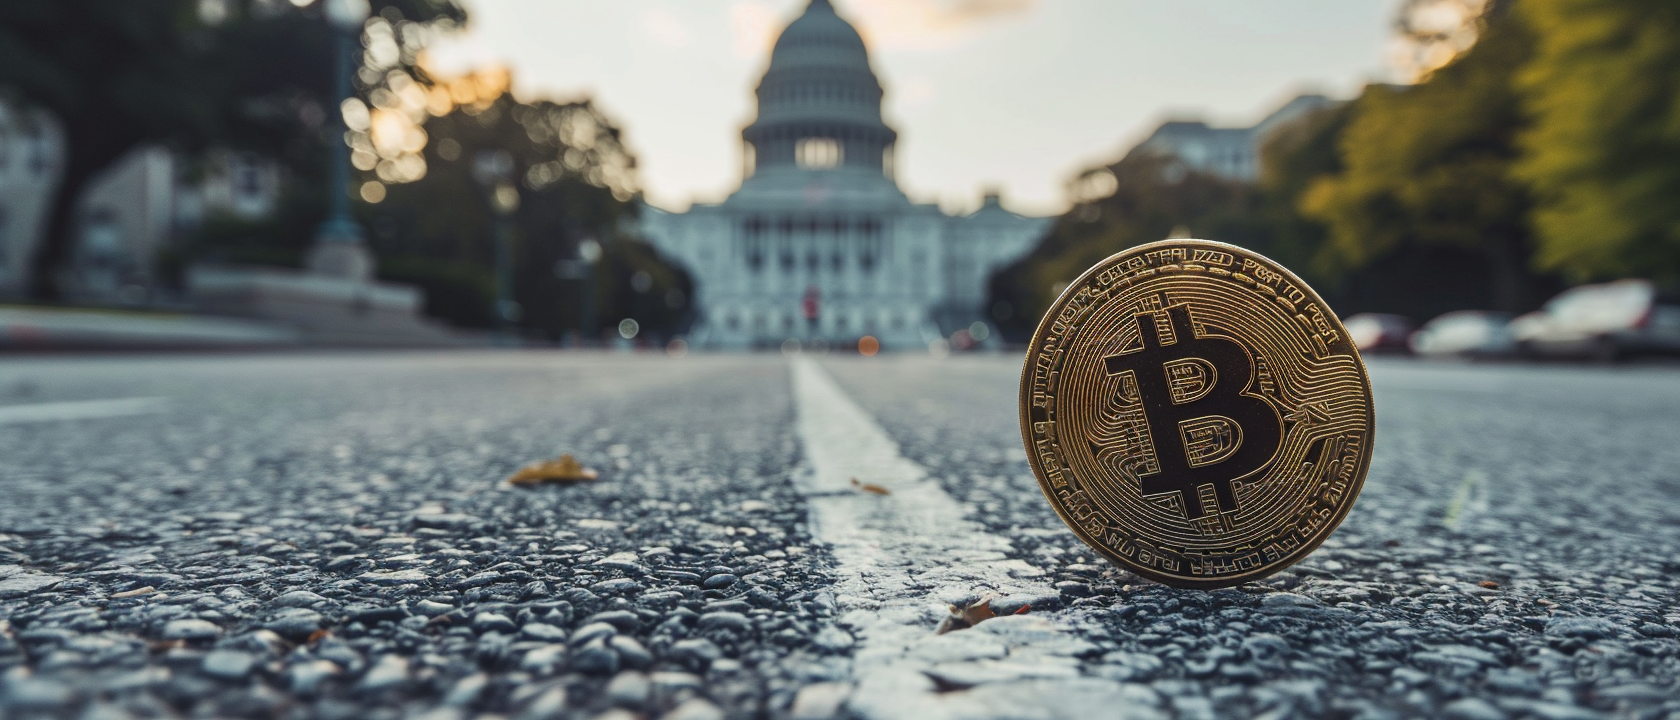 Matt Gaetz Proposes Bill to Enable Bitcoin Payments for Federal Taxes